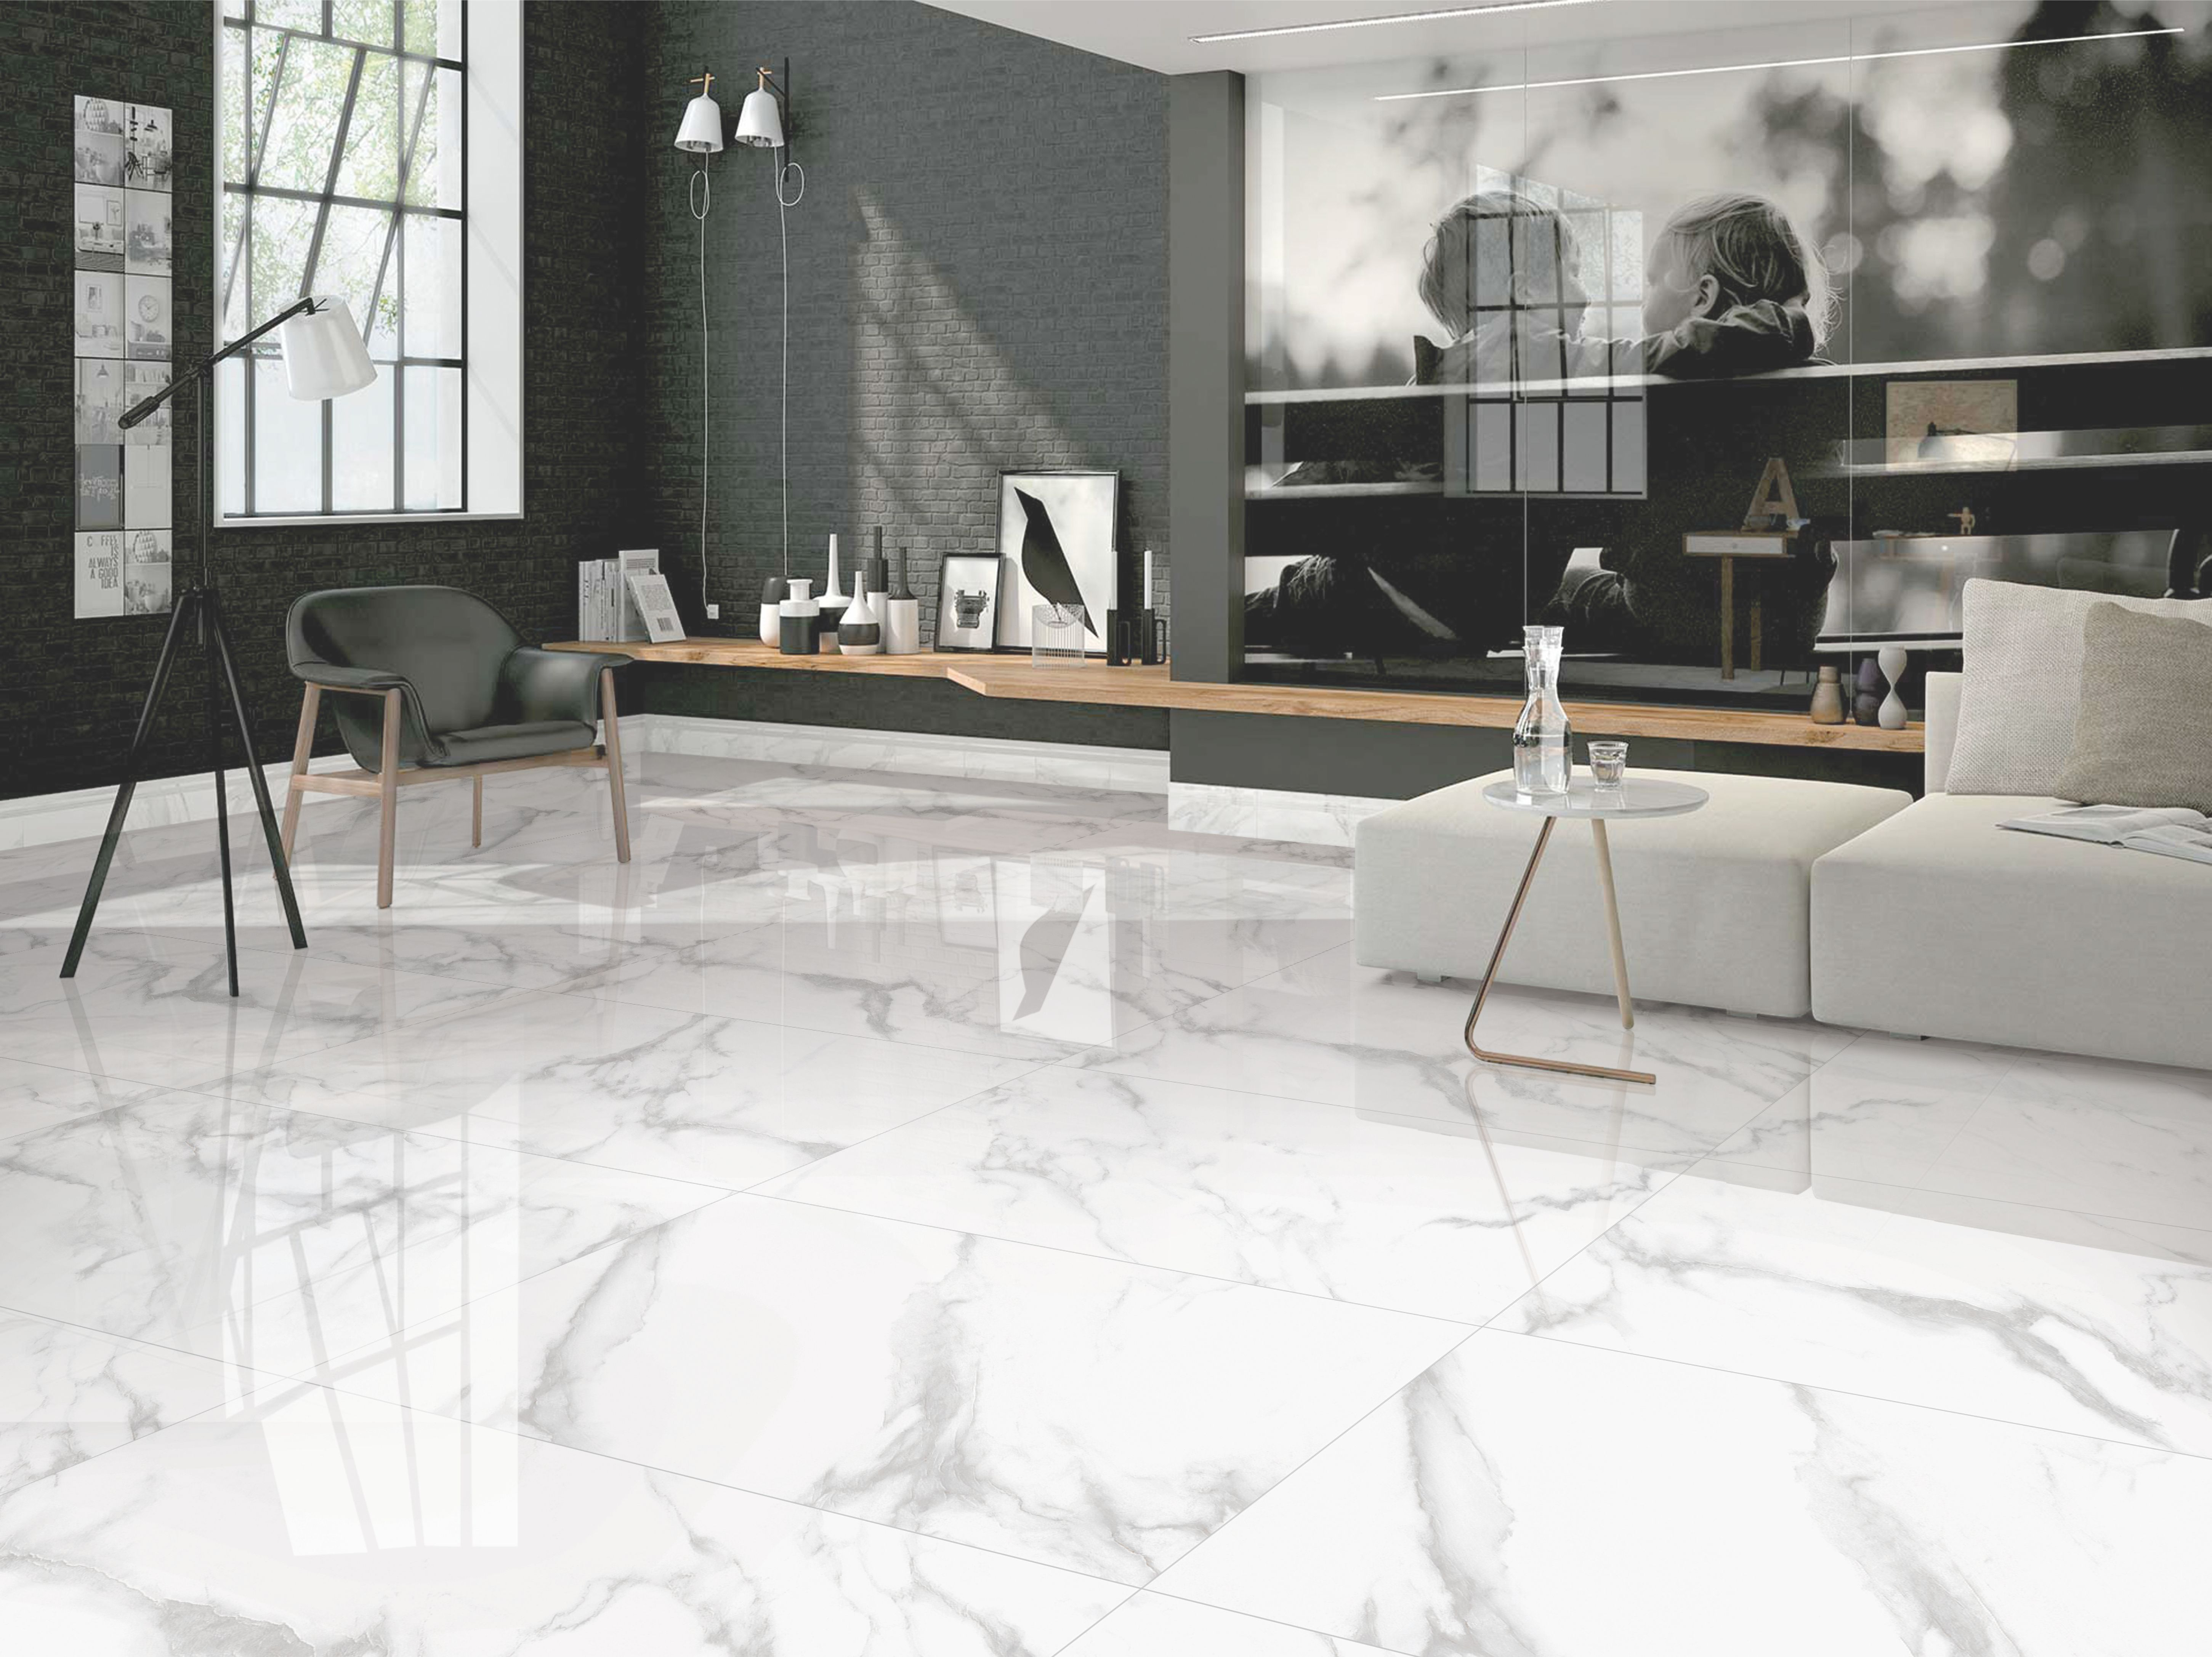 46 Unique Marble Flooring Inspiration Marble Floor Room within dimensions 5804 X 4348